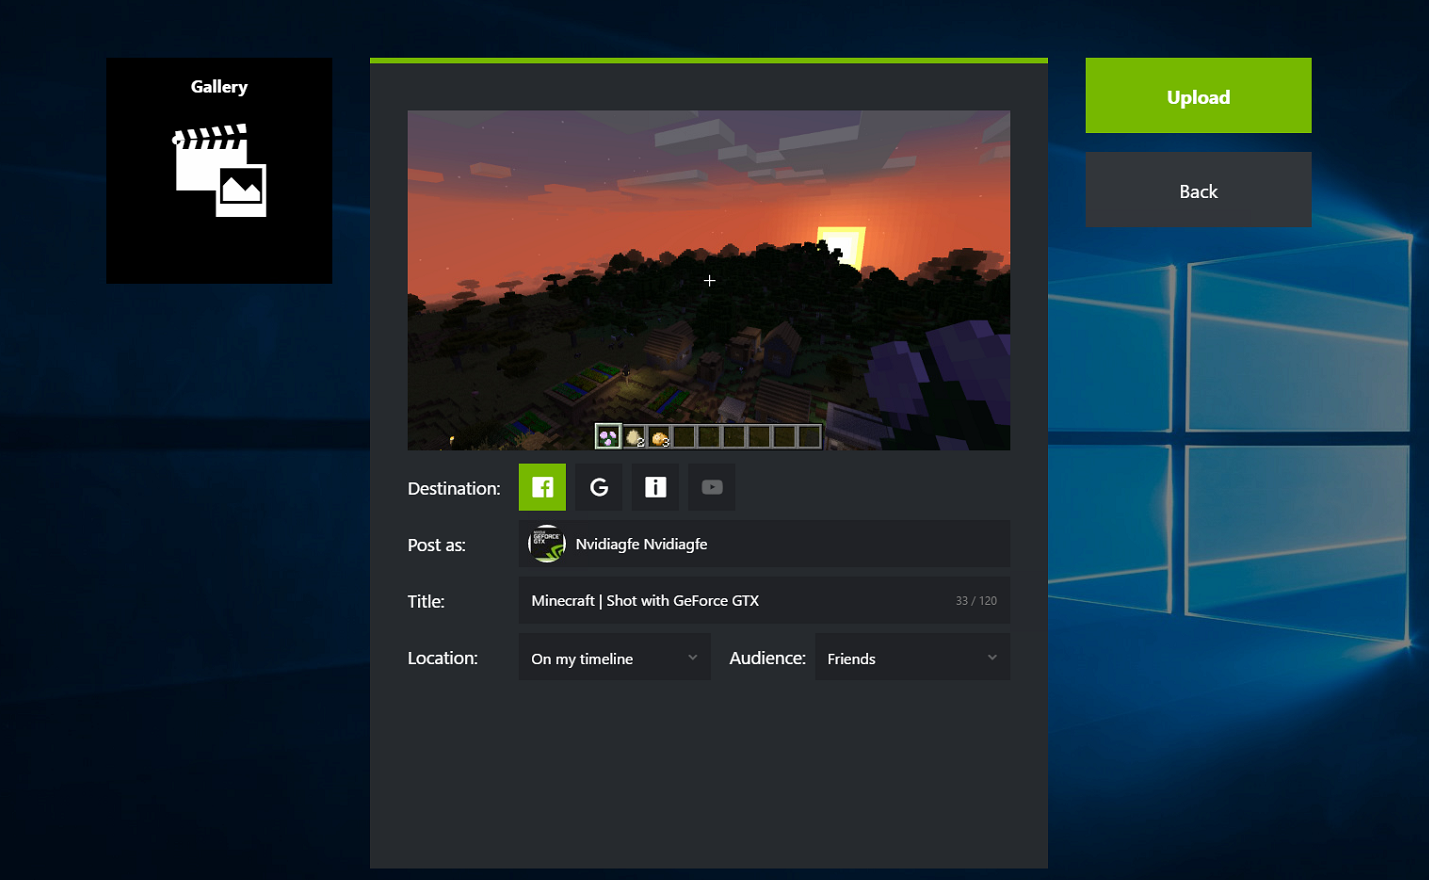 record screen geforce experience